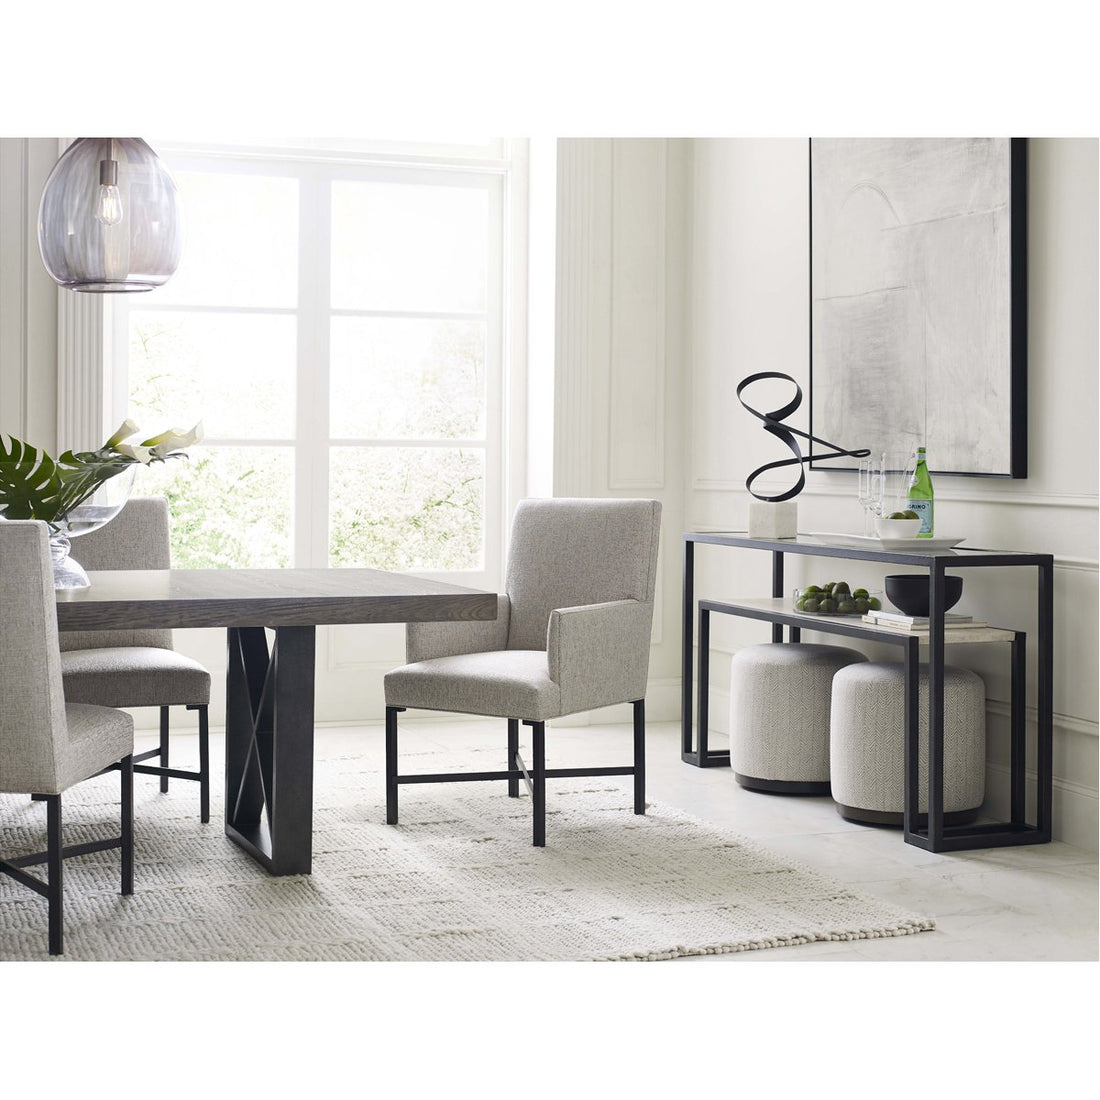 Vanguard Furniture Talbot Console Table